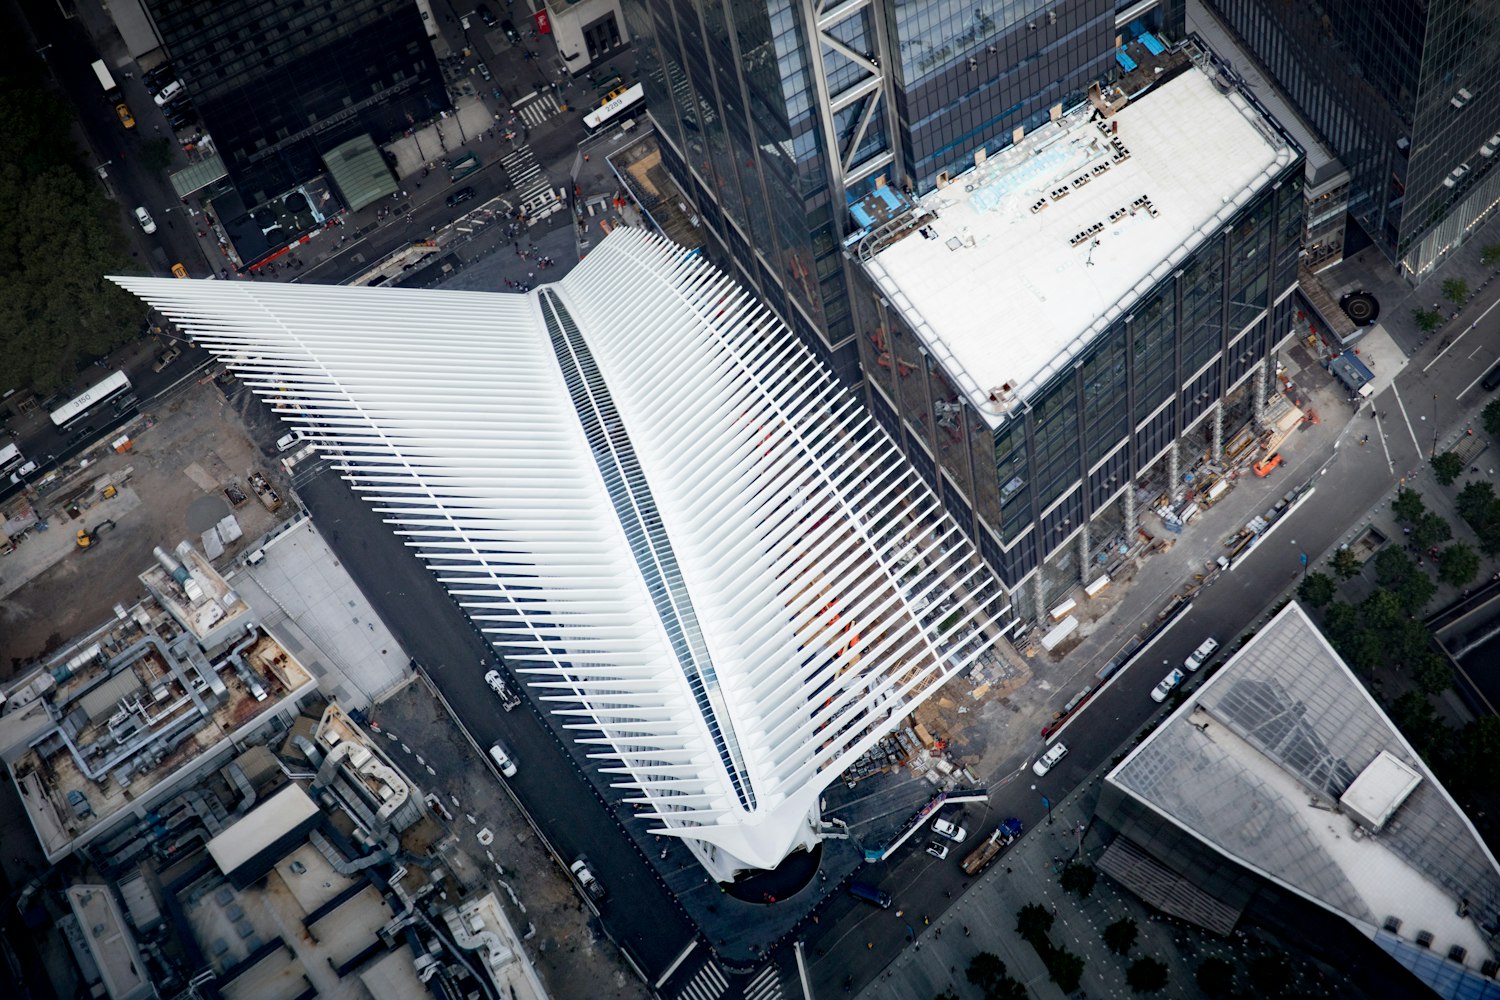 ekko Blodig Lækker How to Visit the Oculus at the World Trade Center in NYC – 911 Ground Zero